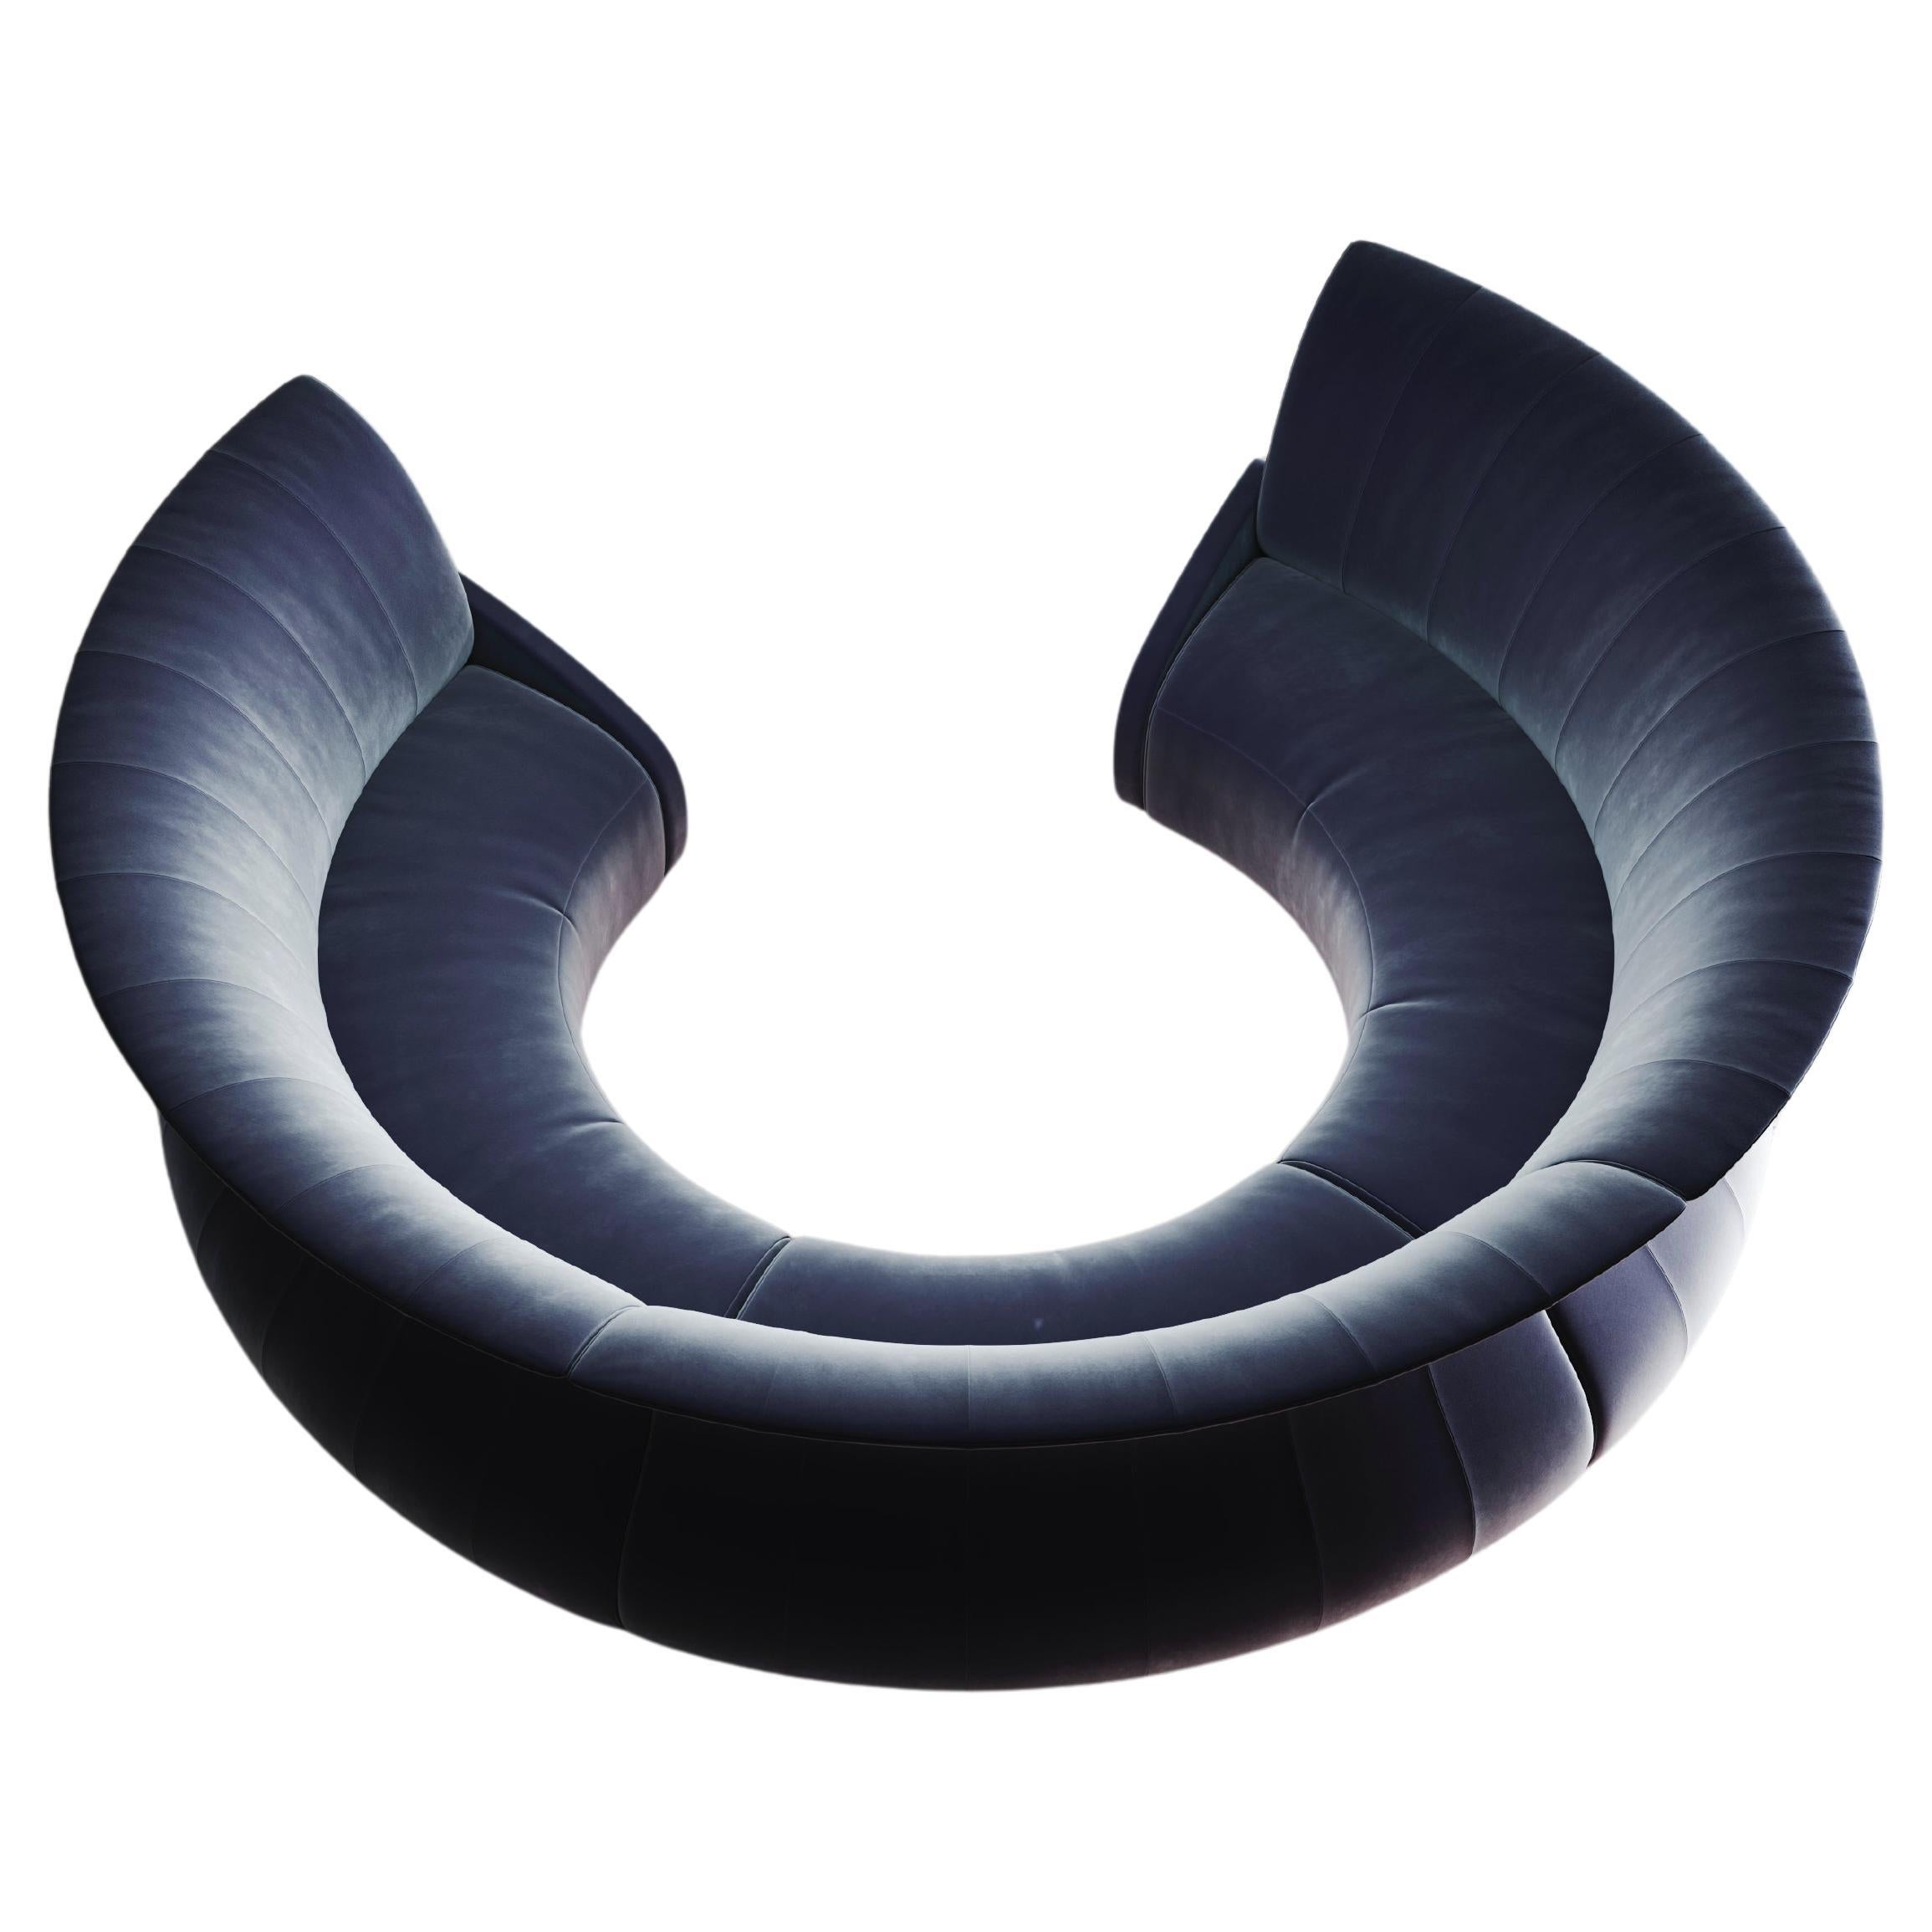 Sculptural Made to Order Modernist Eclipse round sofa For Sale